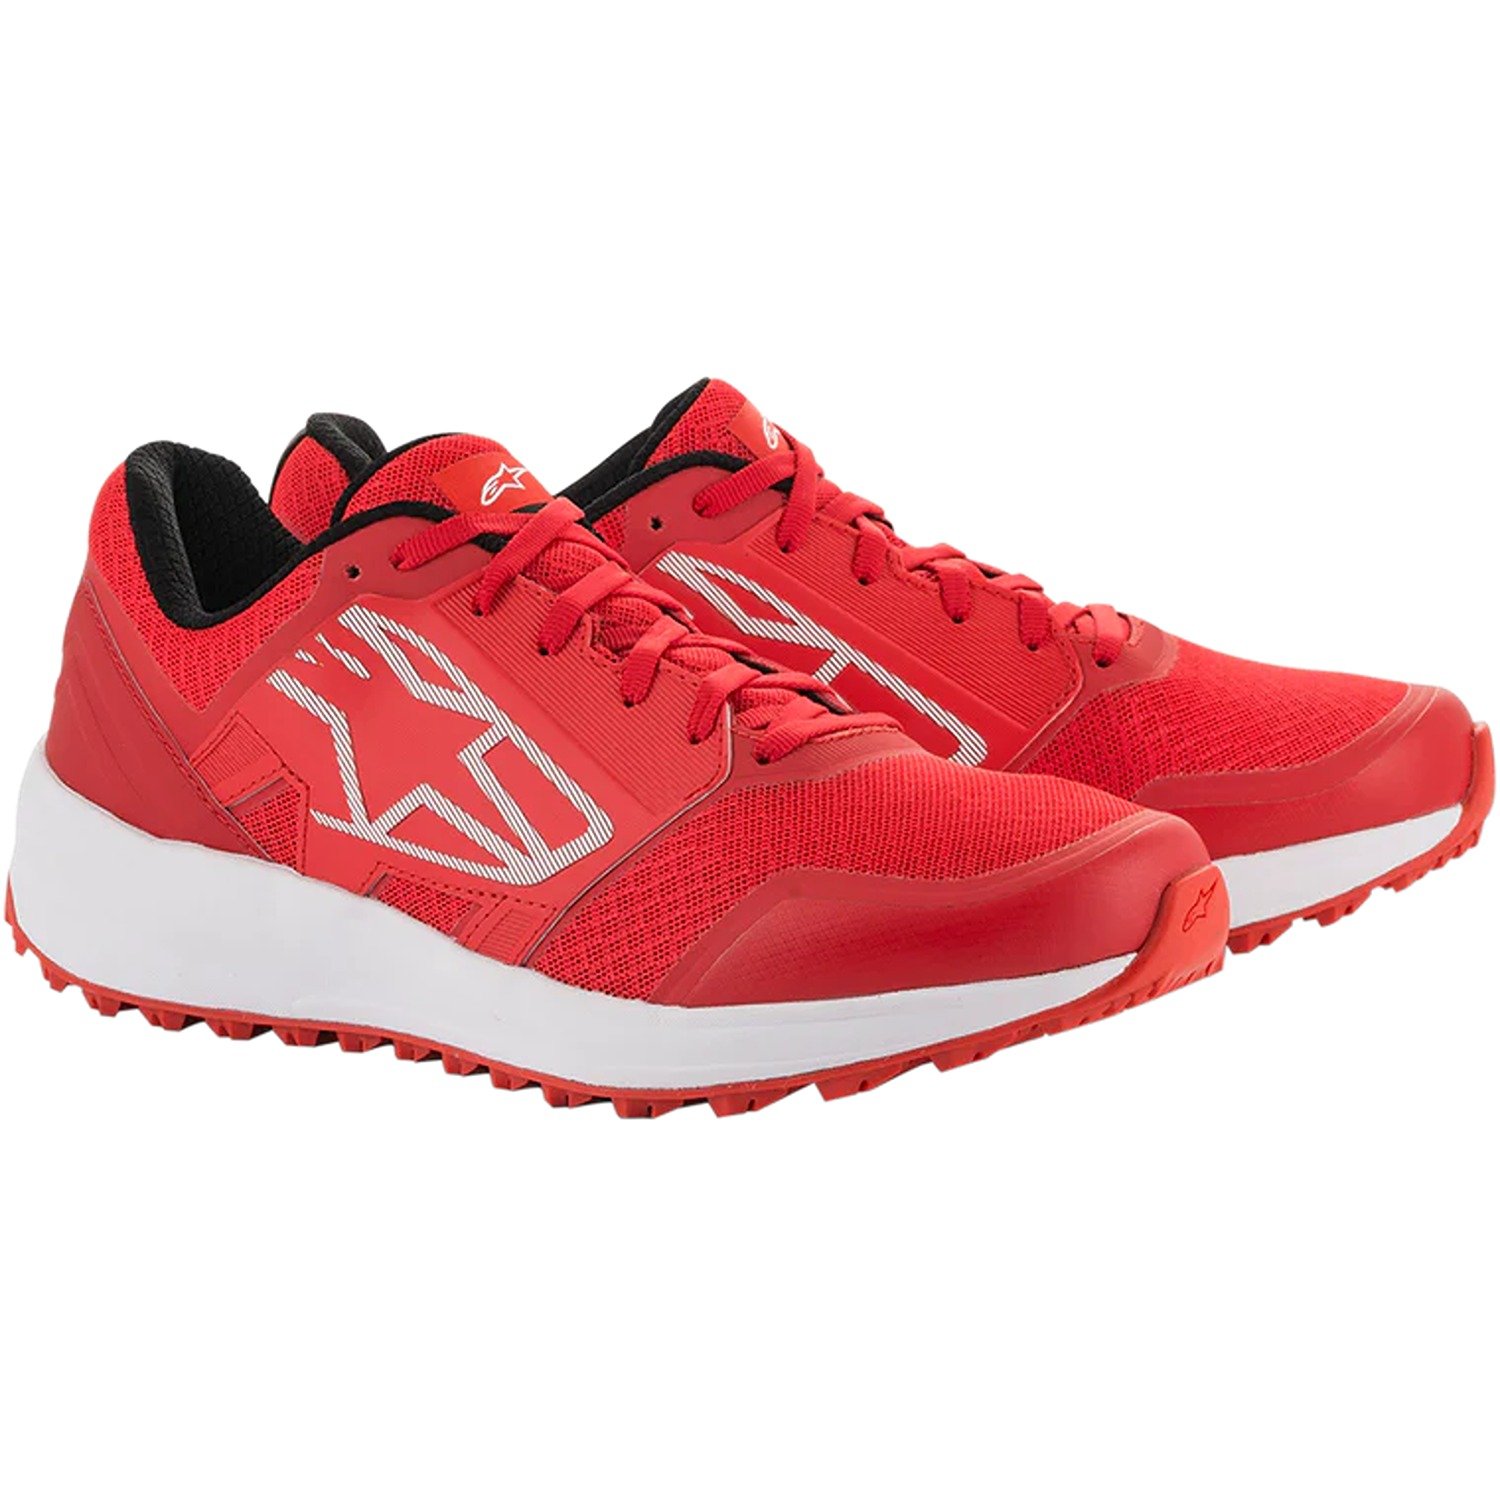 Image of Alpinestars Meta Trail Shoes Red White Size US 95 ID 8059175092114